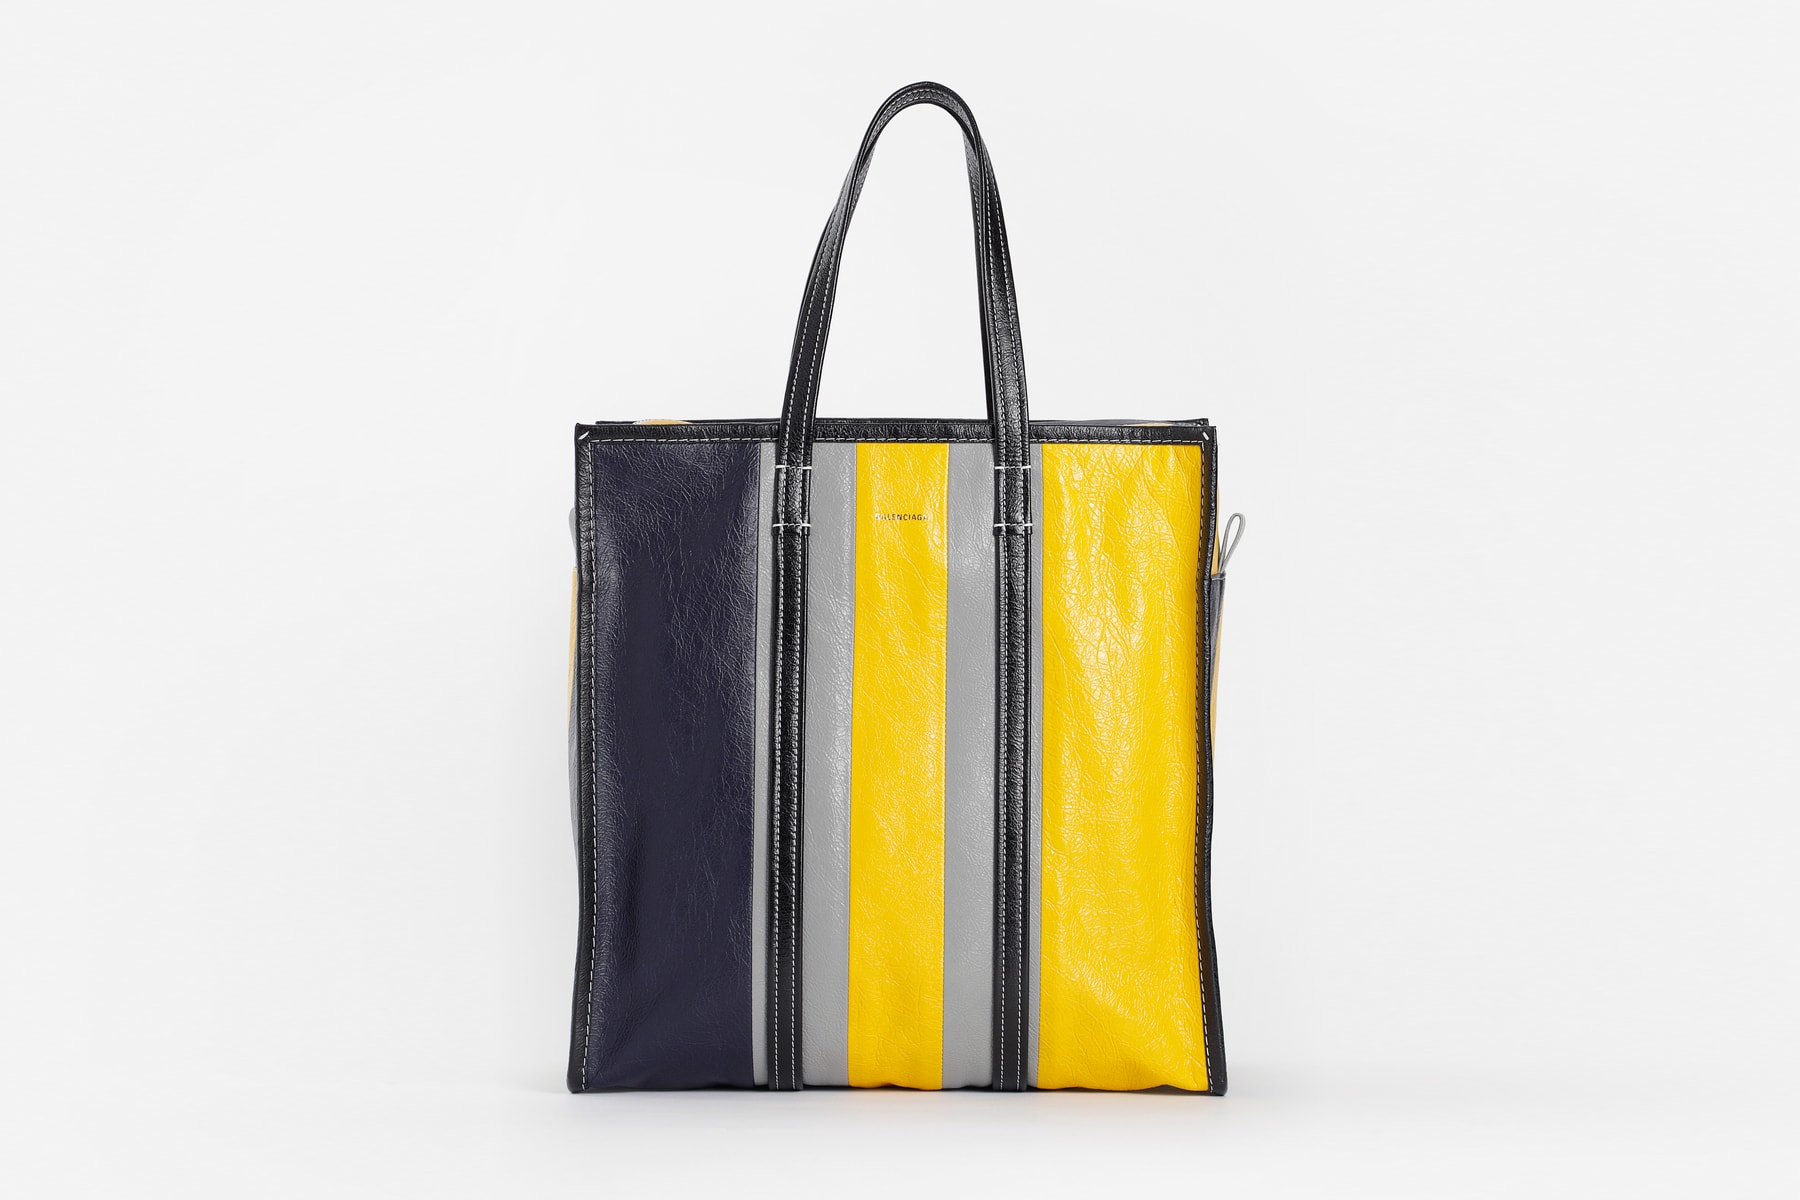 Balenciaga Fall Winter 2018 collection Leather Tote Bags accessories release info black grey yellow red